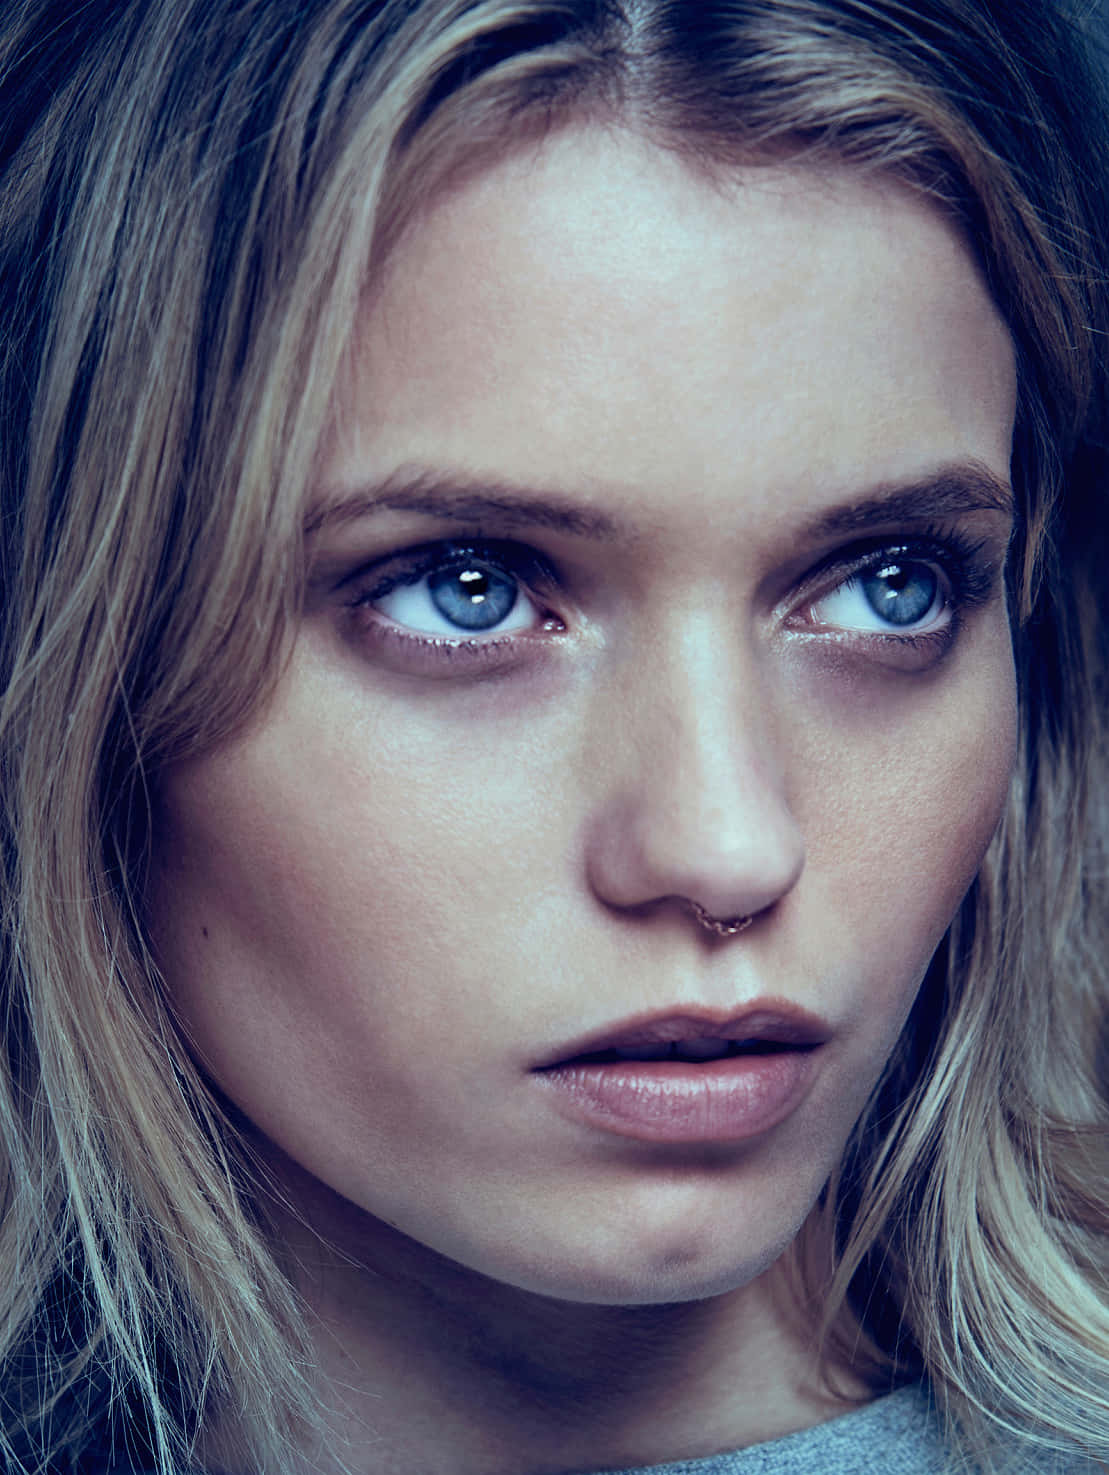 Stunning Abbey Lee Kershaw In Her Dynamic Style Background